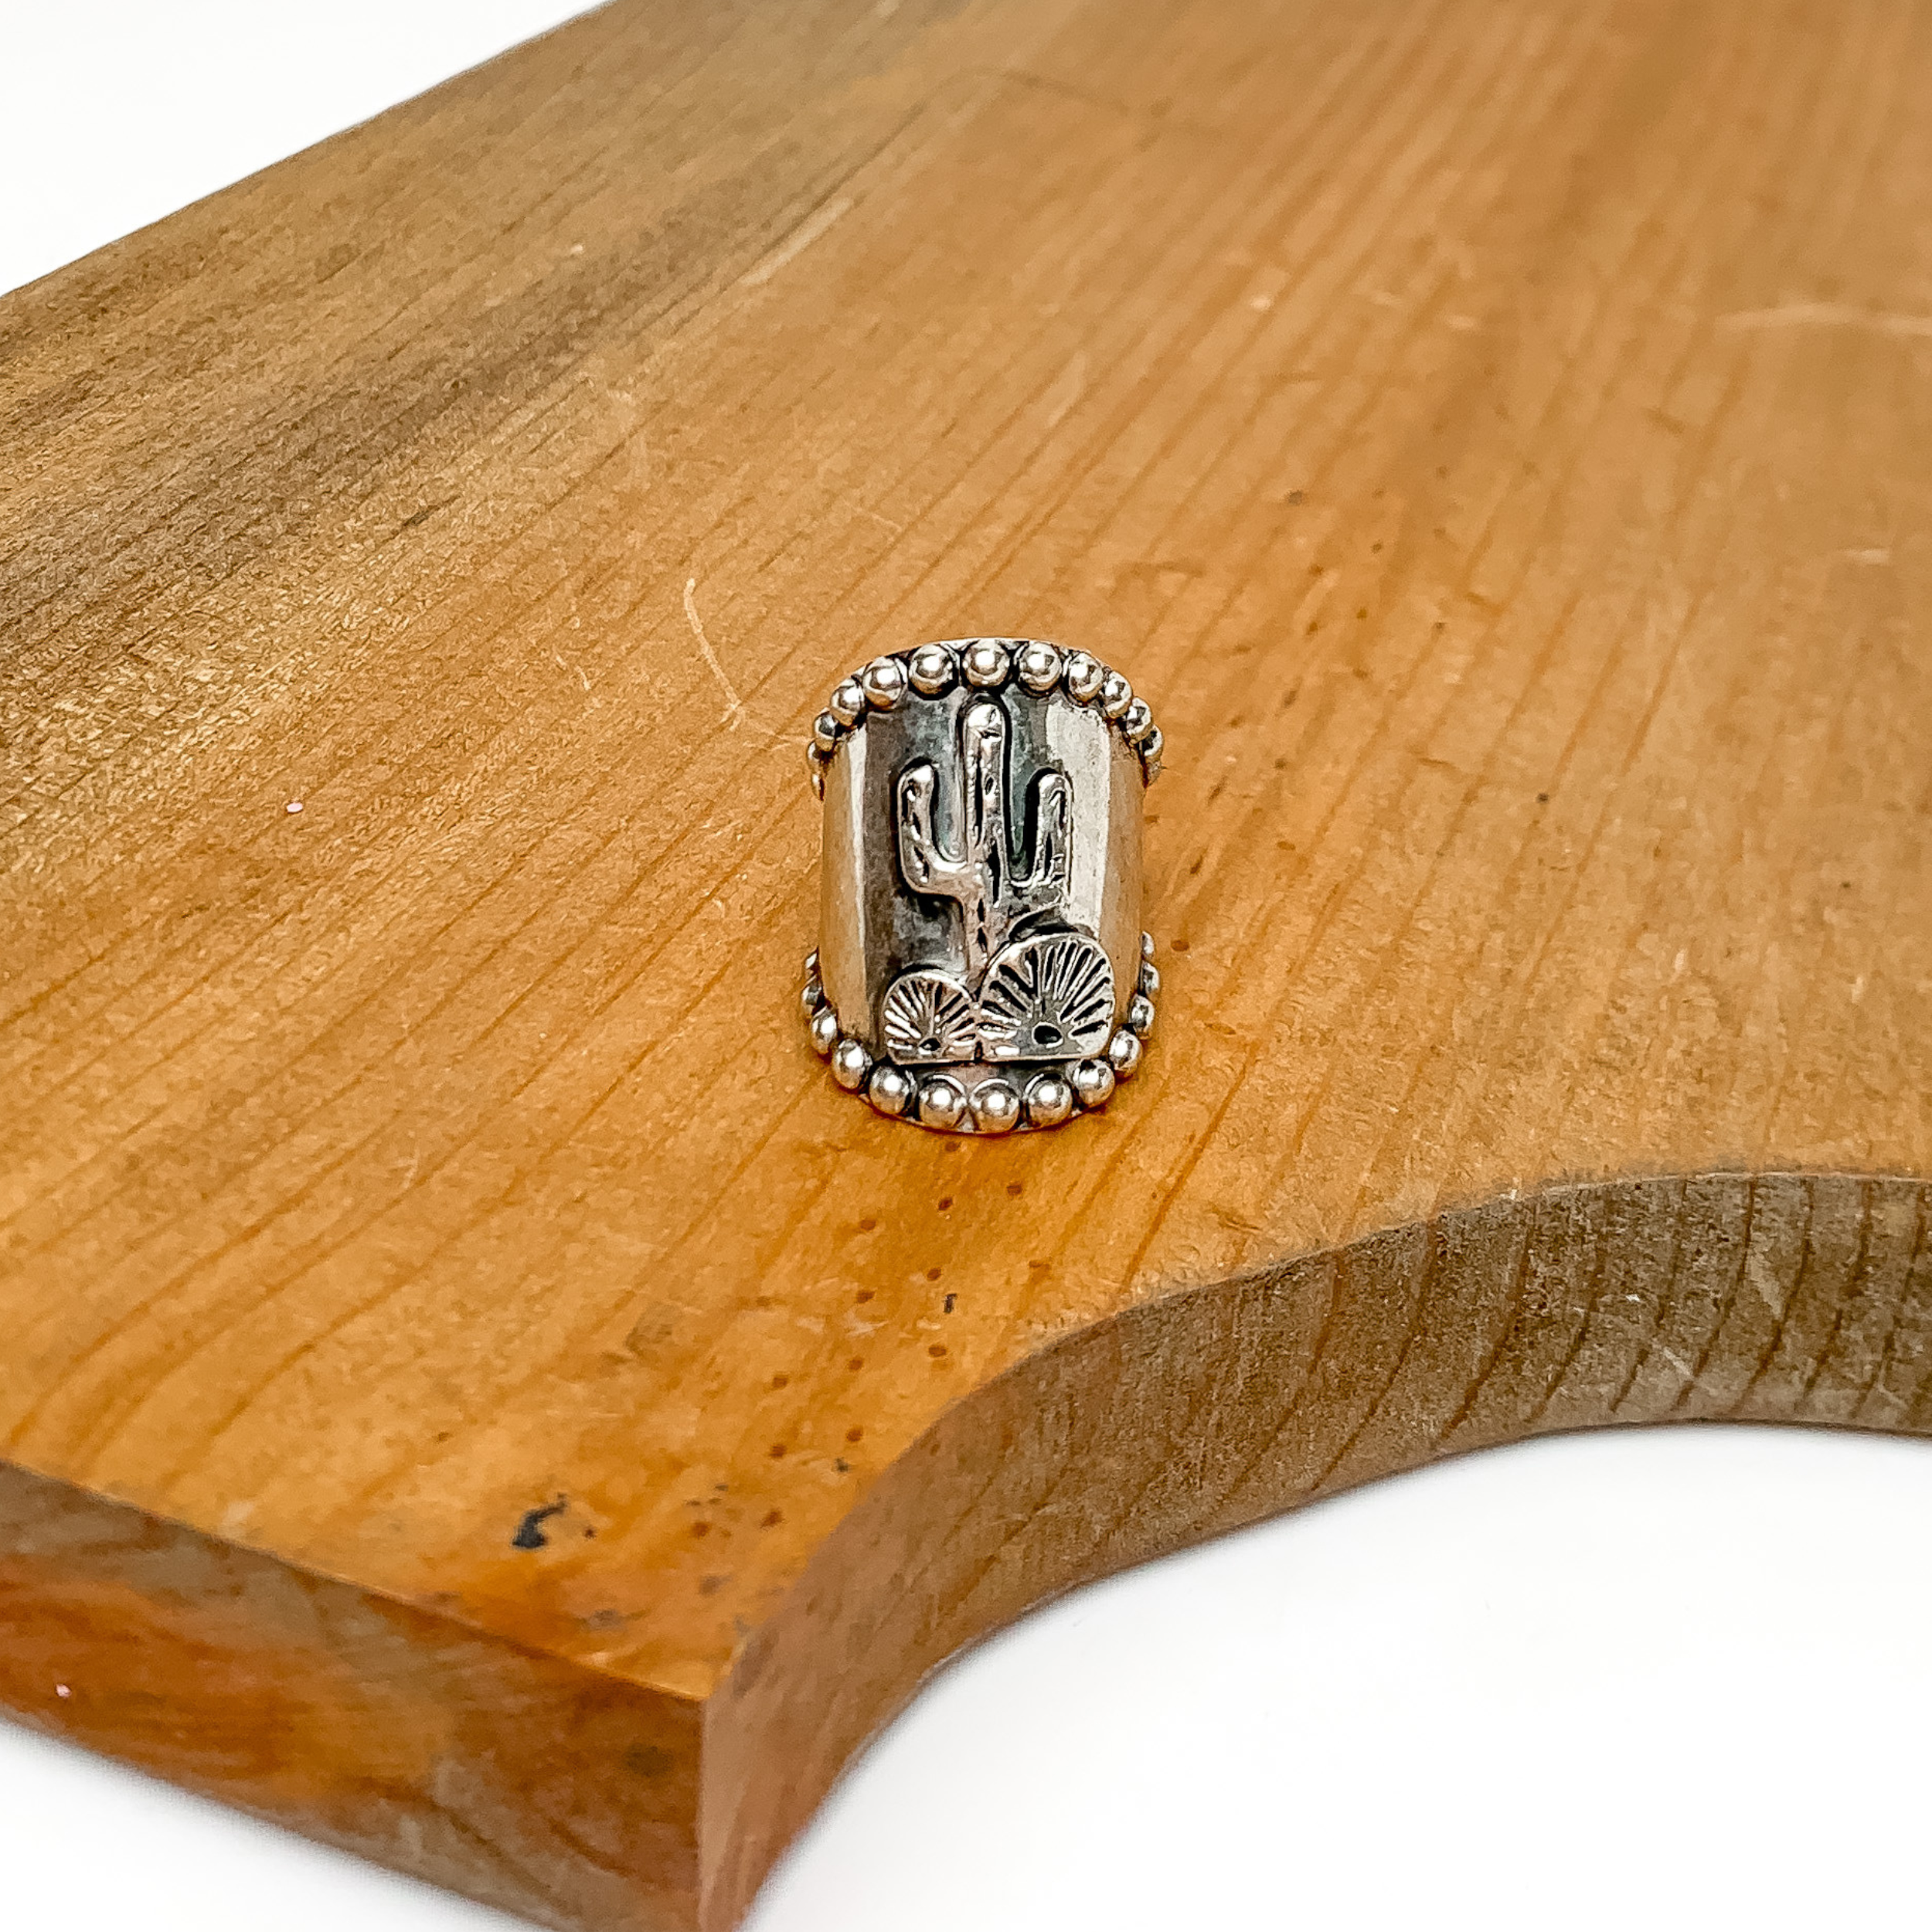 Silver Tone Desert Scene Cuff Ring. Pictured on a wood platform.